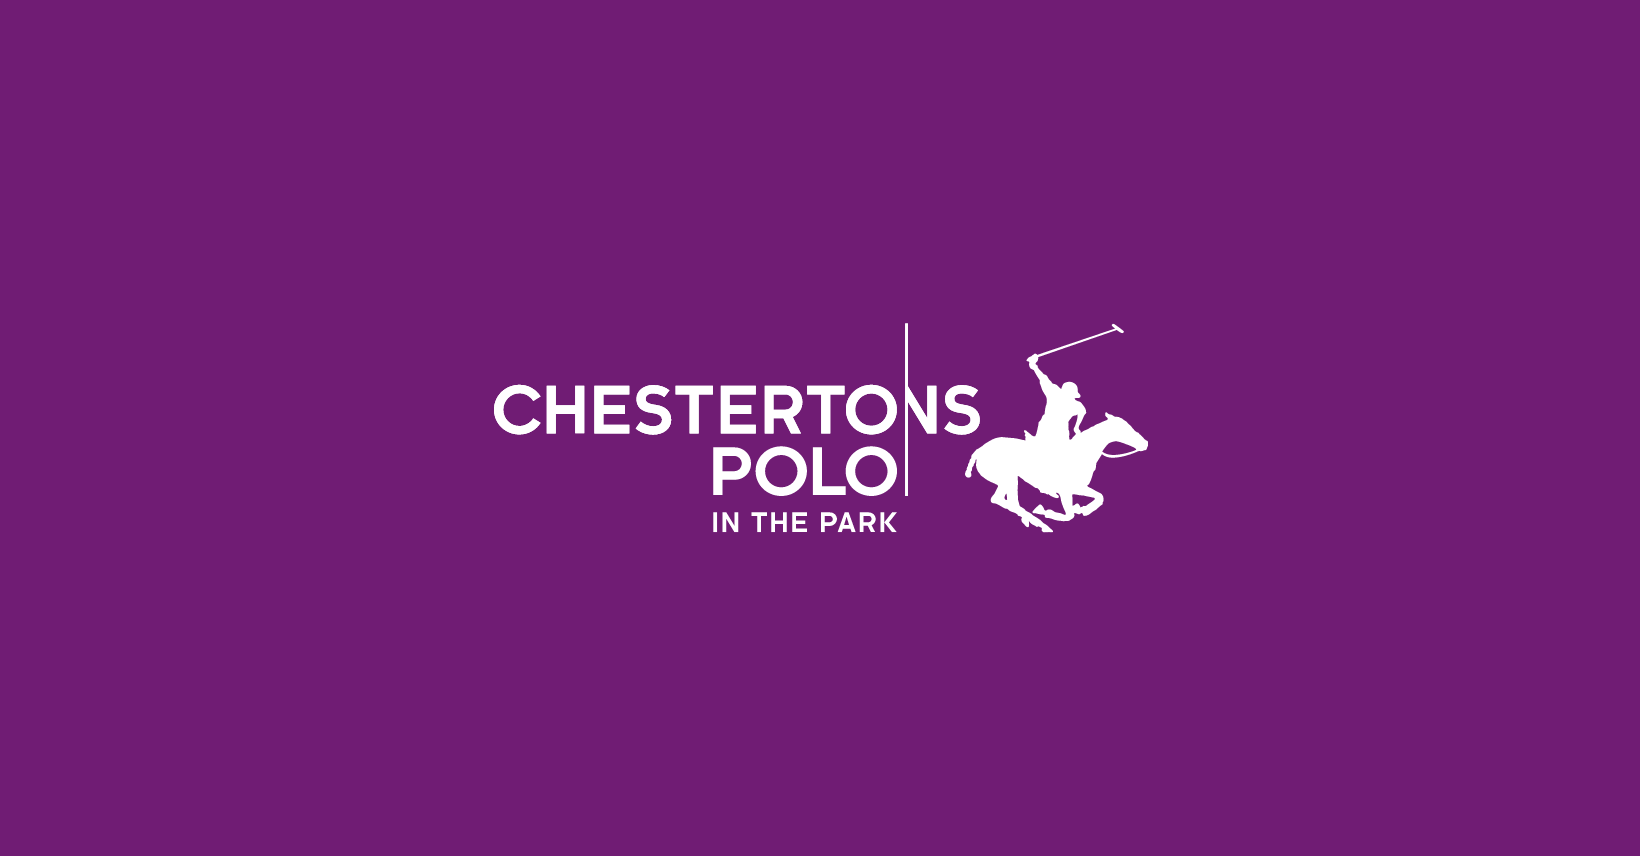 Chestertons Polo in the Park logo